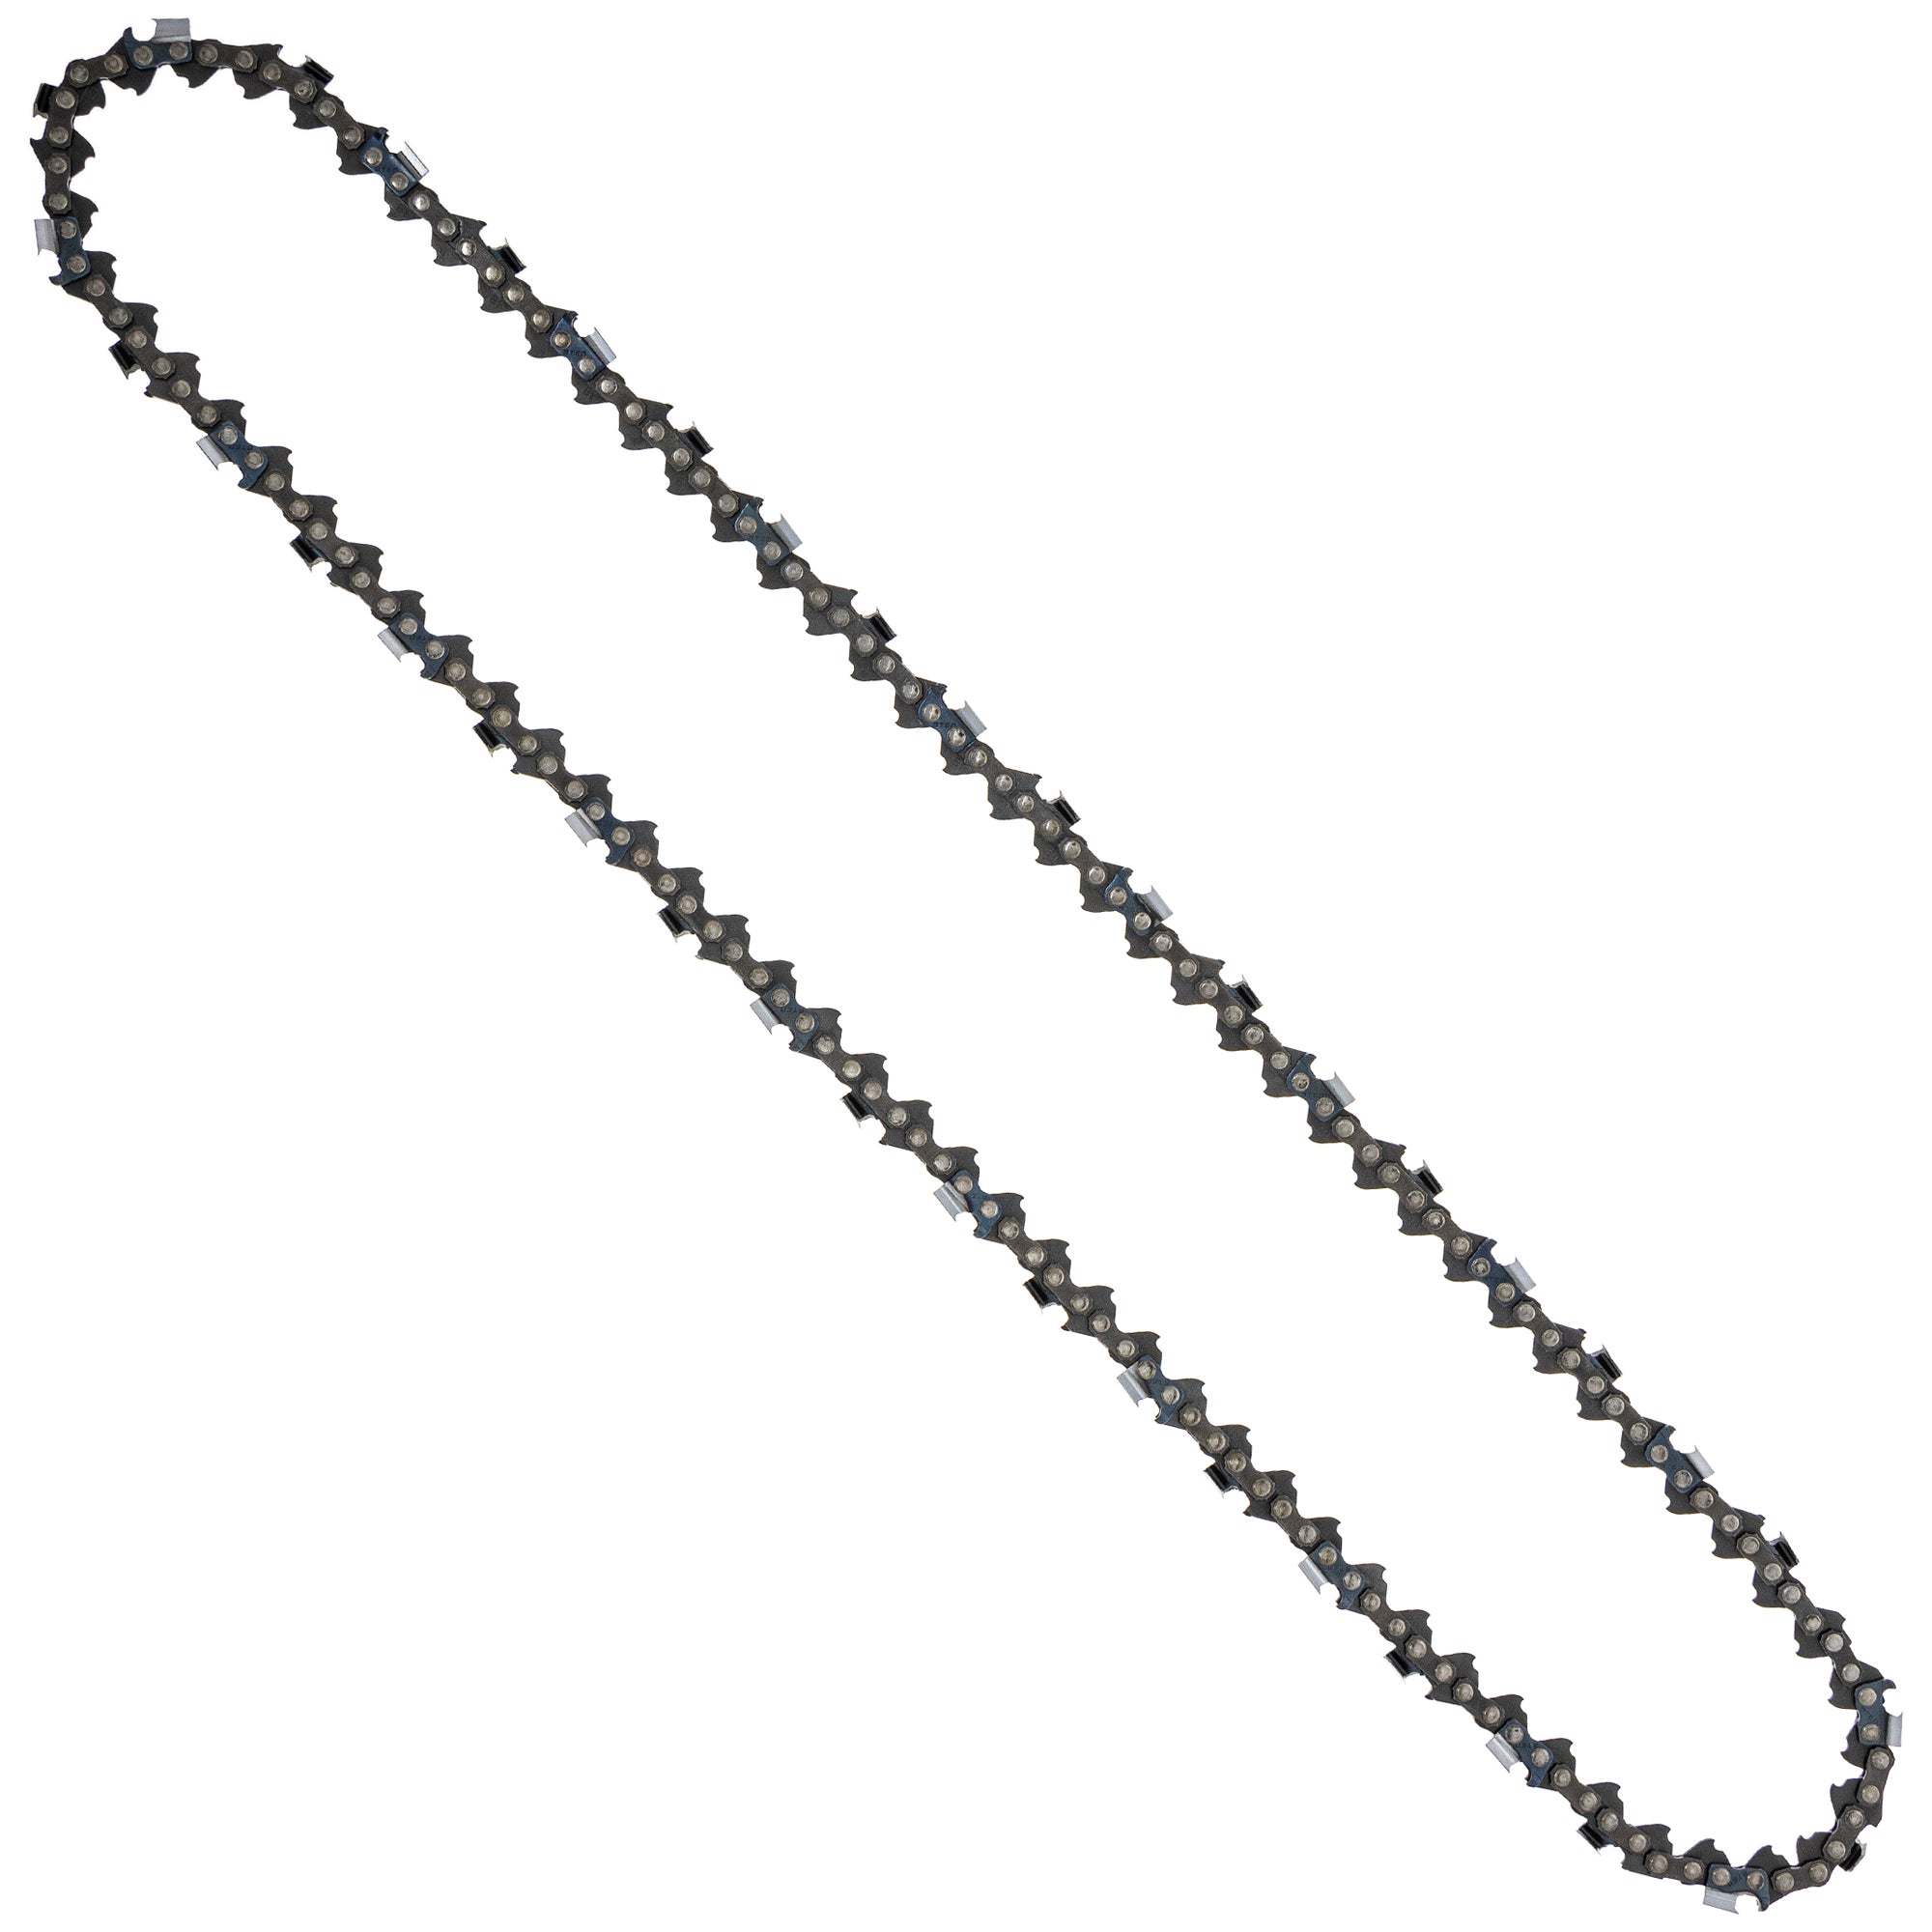 8TEN 810-CCC2310H Chain 6-Pack for zOTHER Oregon MS 634 30 040